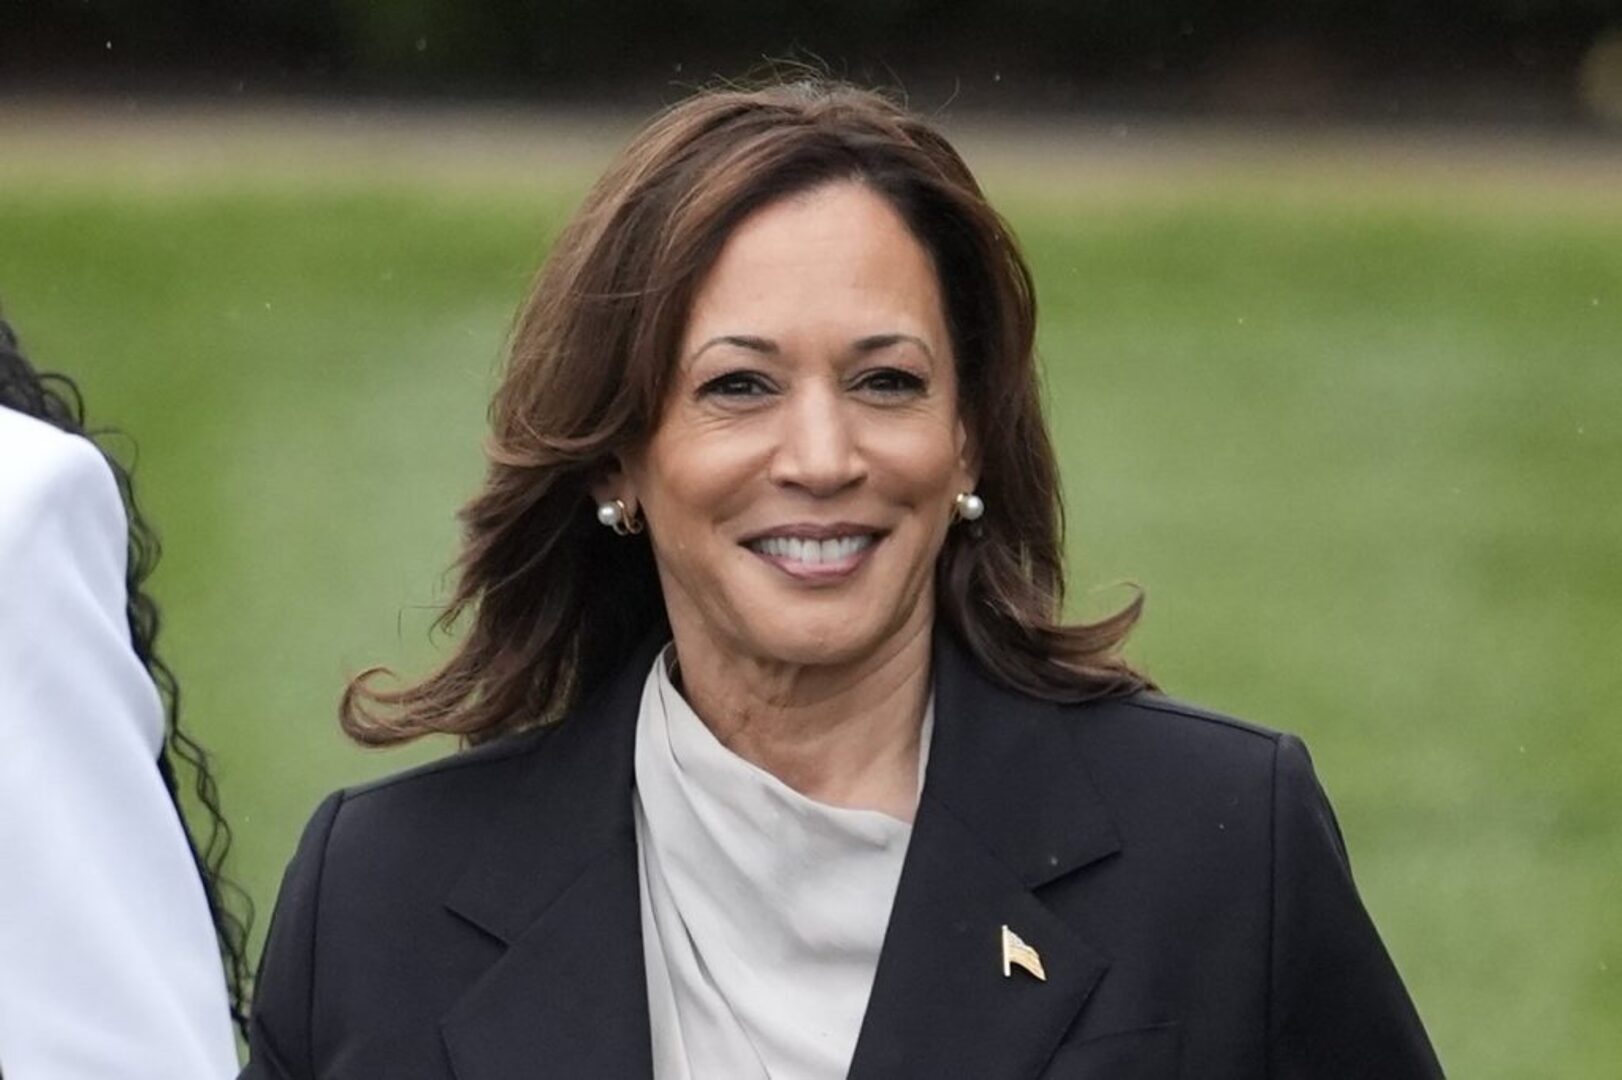 How will Kamala Harris handle foreign policy?